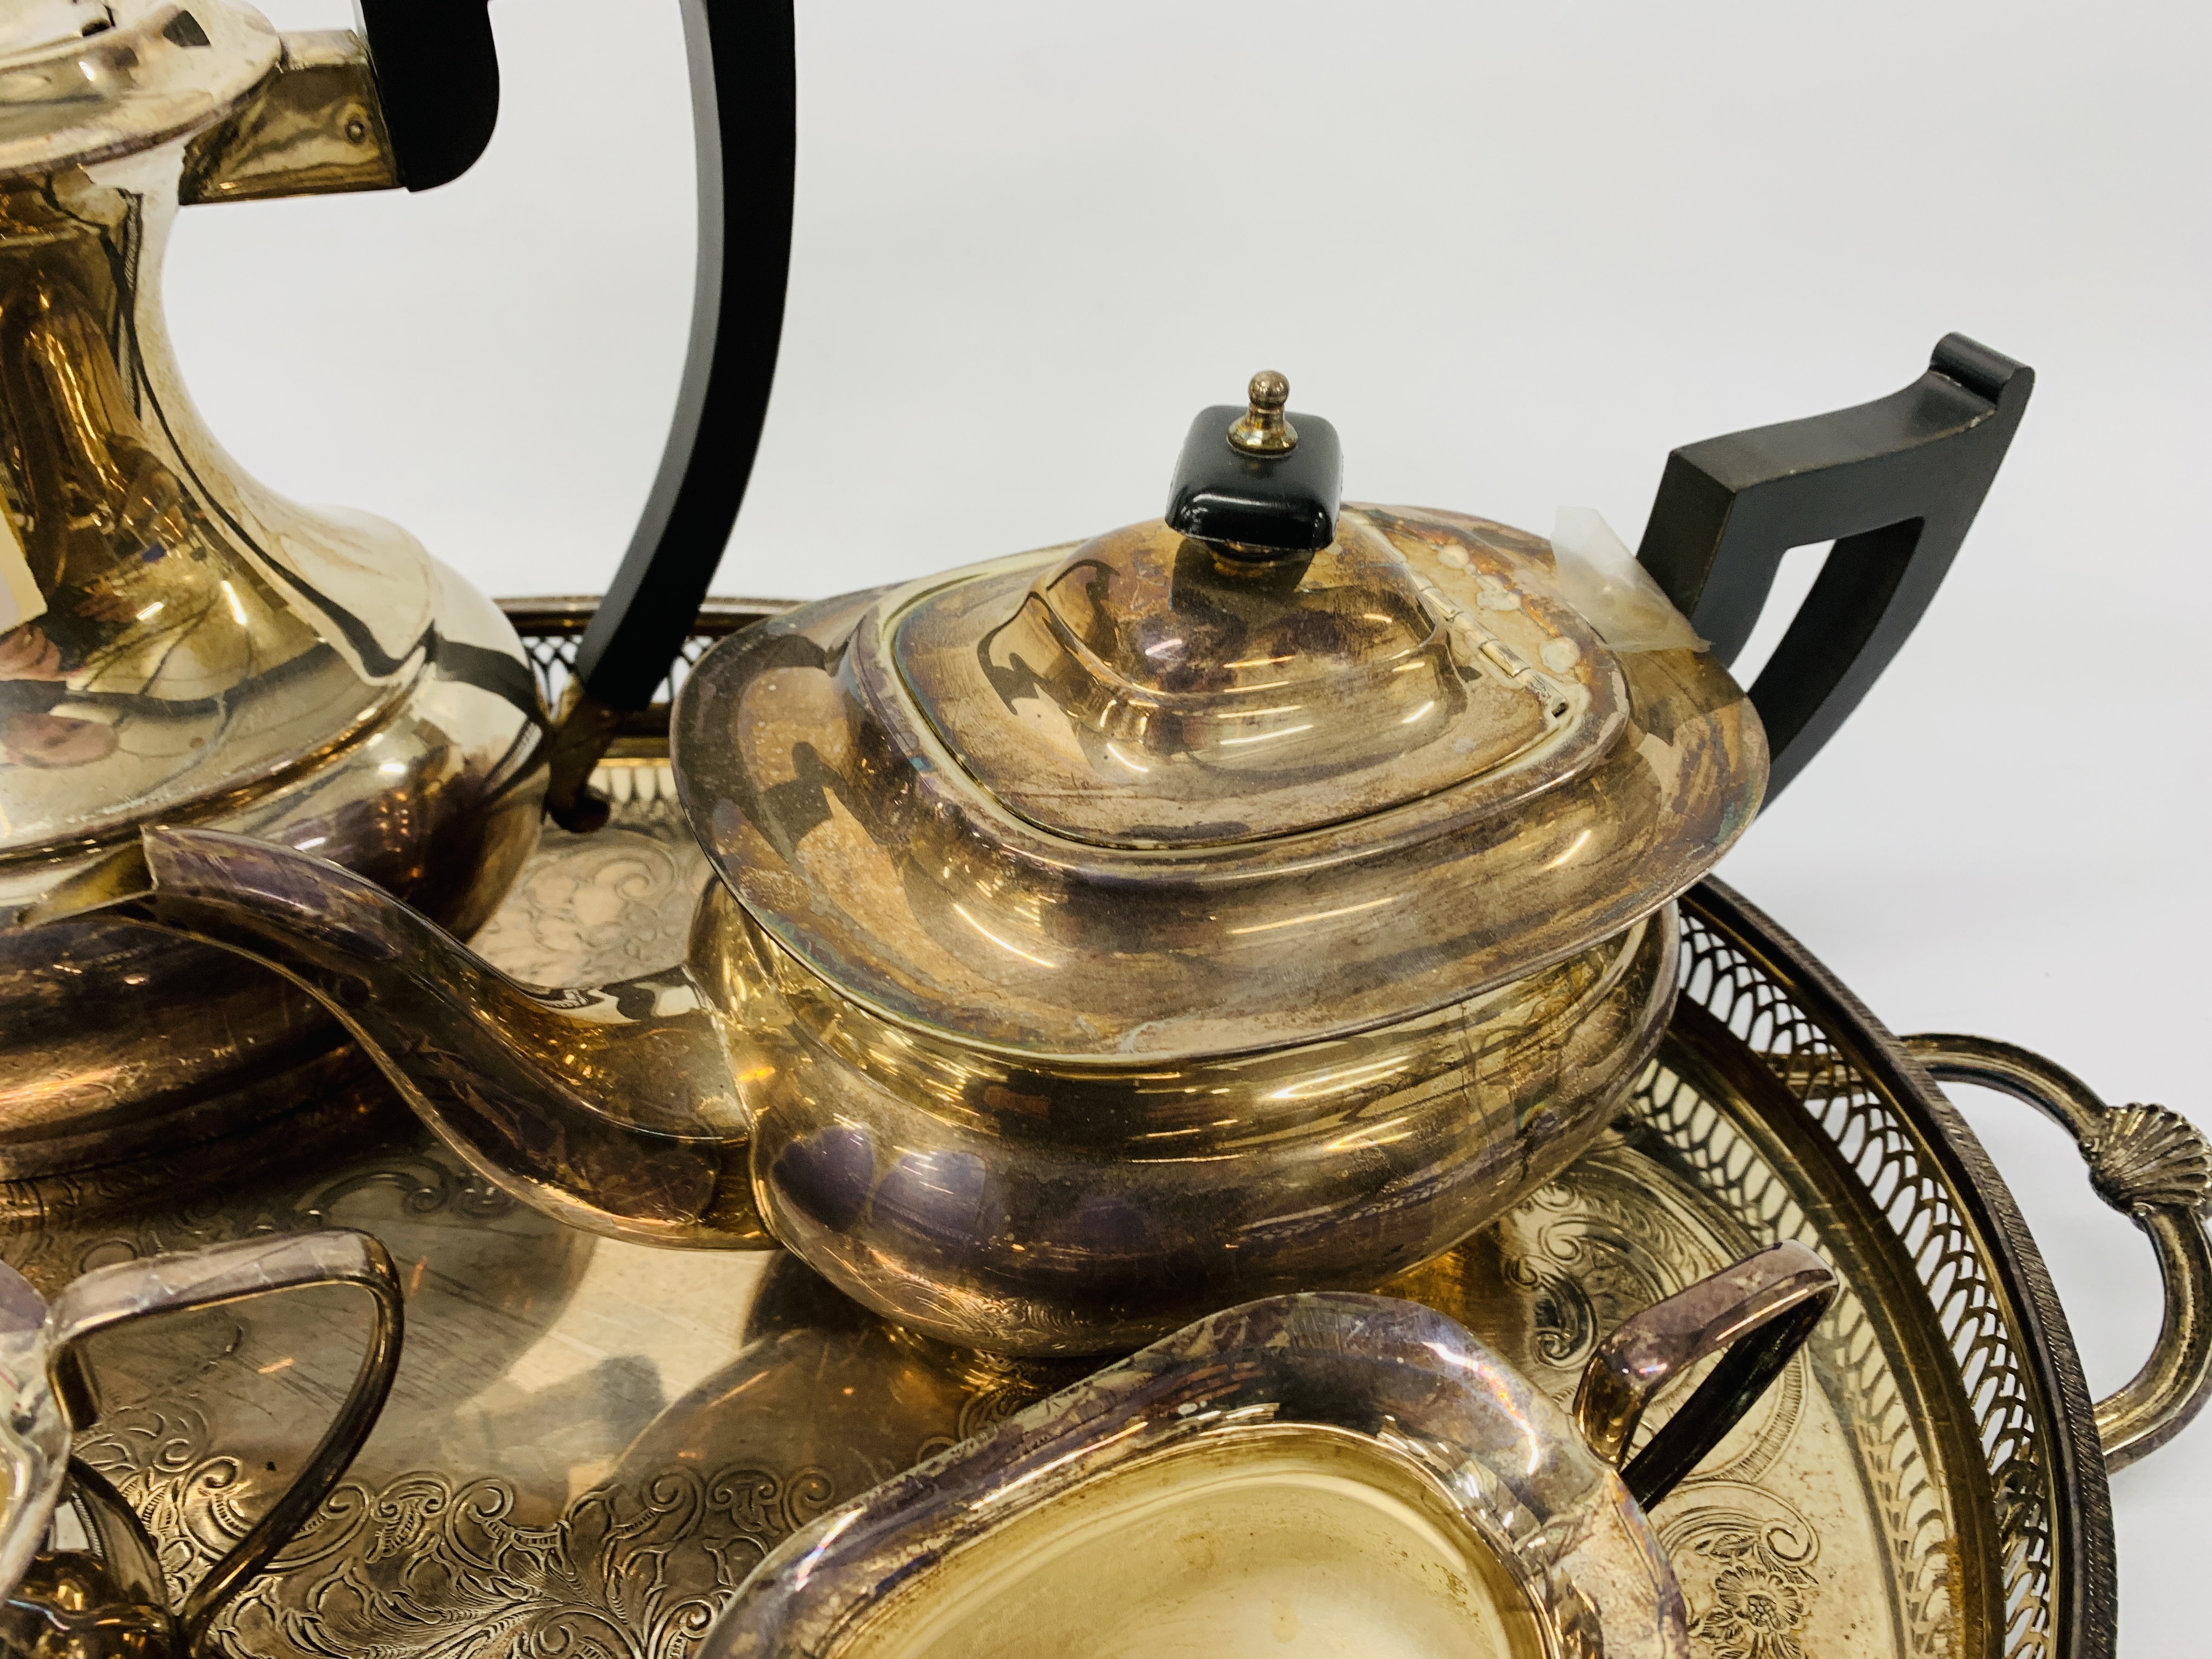 PLATED 4 PIECE TEASET TOGETHER WITH 2 HANDLED TRAY ENGRAVED DETAIL - Image 5 of 6